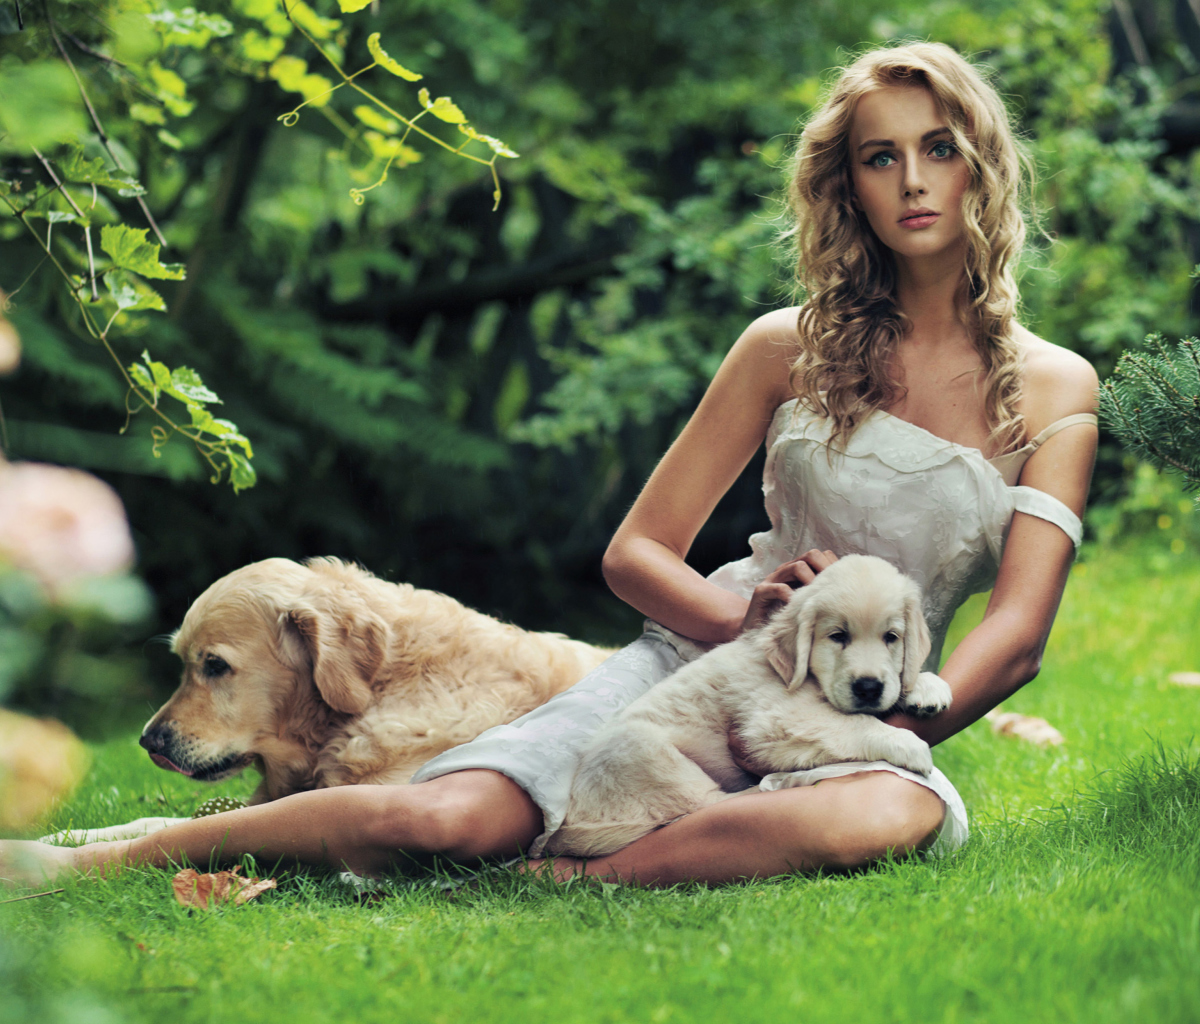 Model And Dogs wallpaper 1200x1024